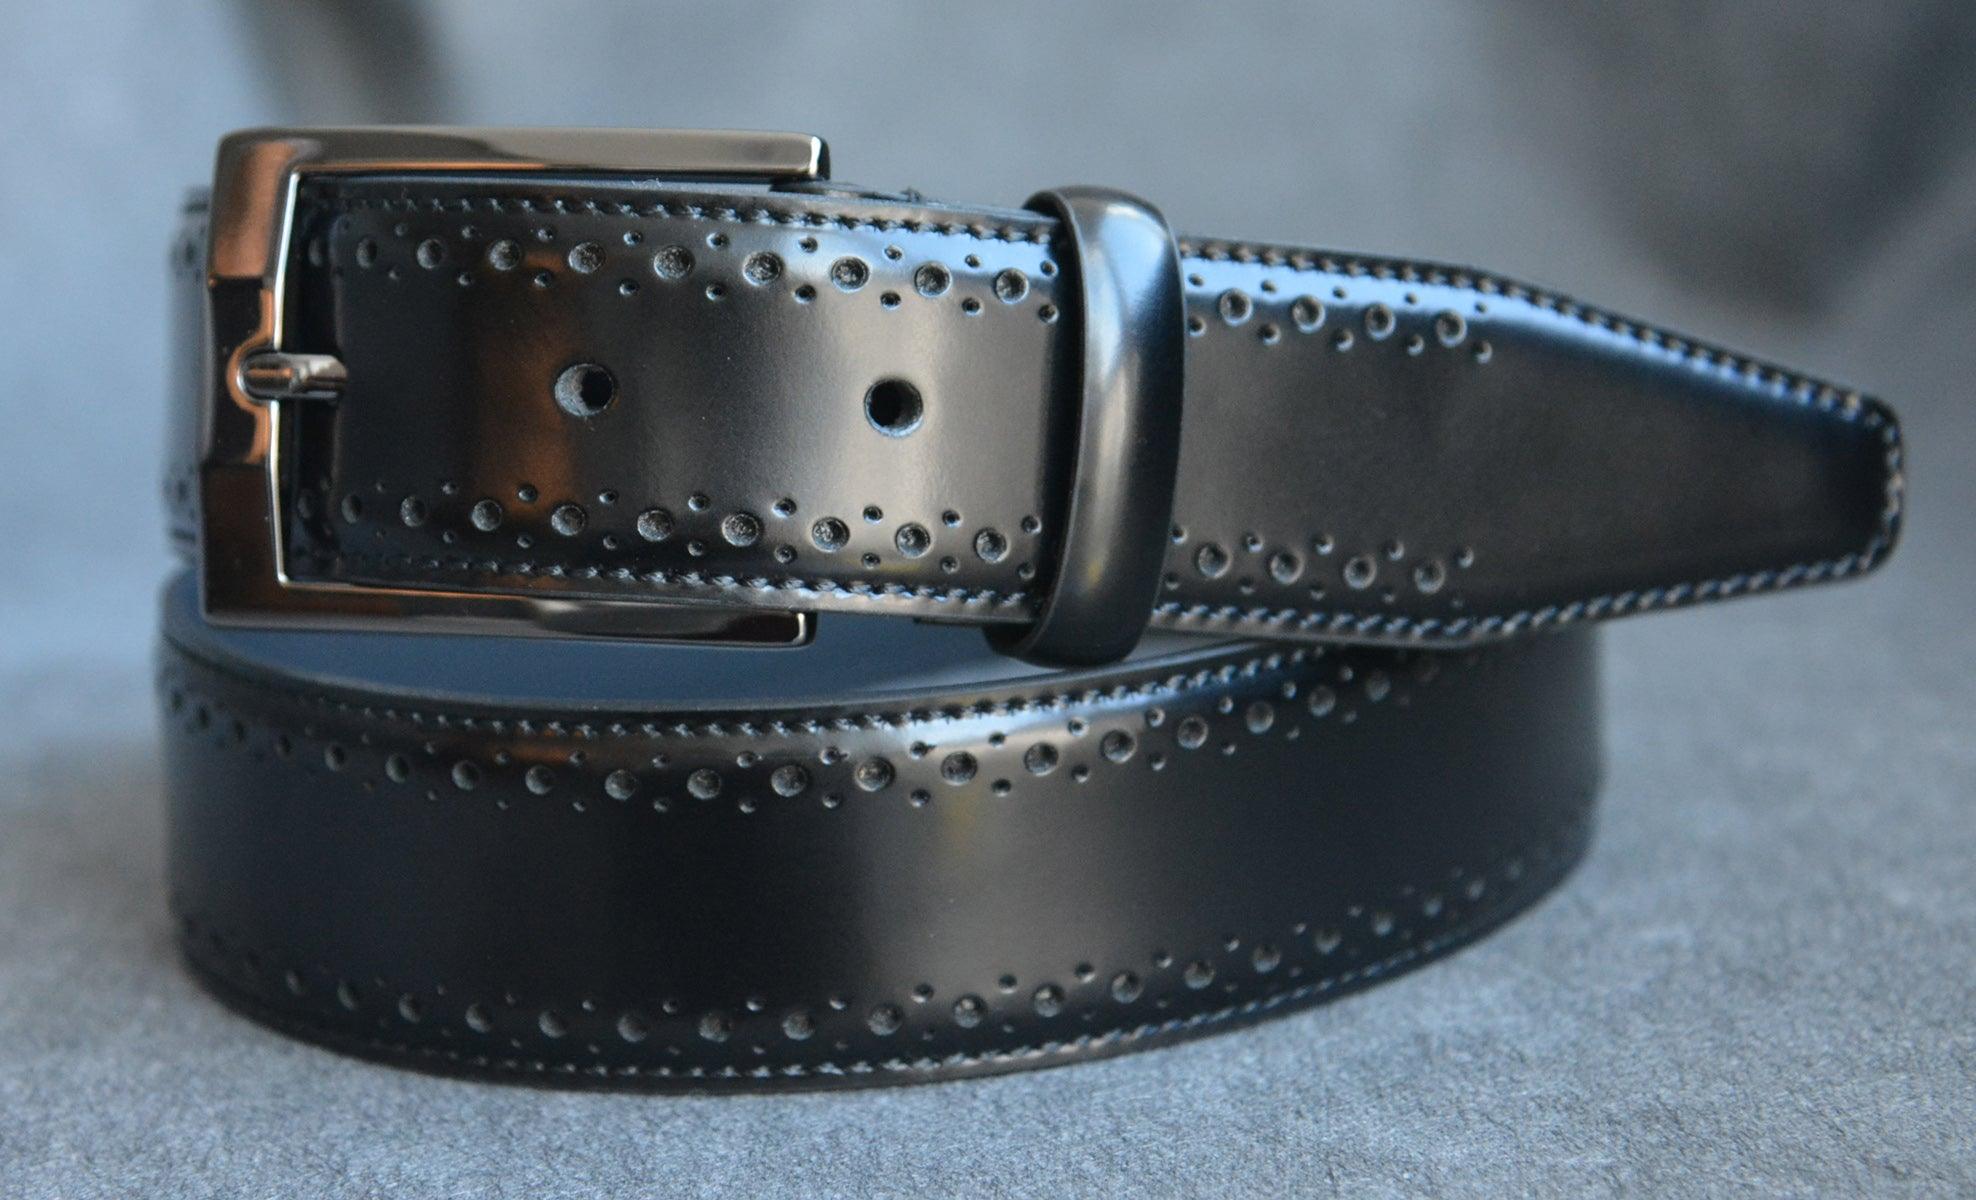 Pants or jeans are perfect for this perforated belt on glove leather. Soft glazed, polished buckle.   Men's edge embossed belt by Marcello Sport in Black.  Italian leather. Satin nickel finished buckle. Perfect look for a dressy style. Available in Black or Cognac. Imported.